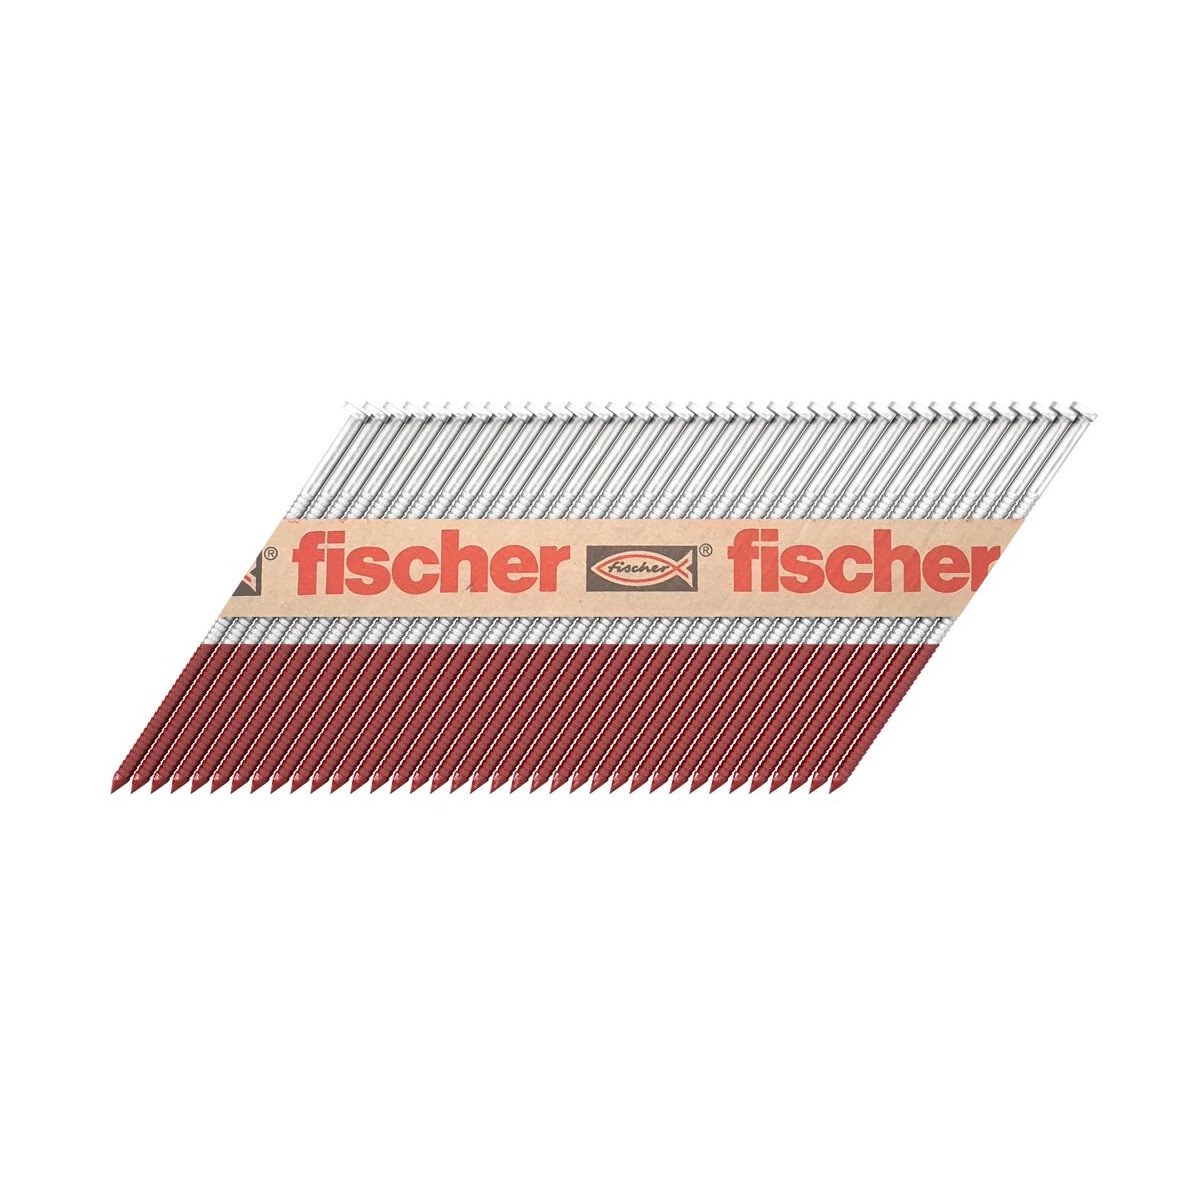 Fischer FF NFP 90x3.1mm Ring Galv 2200 N.G